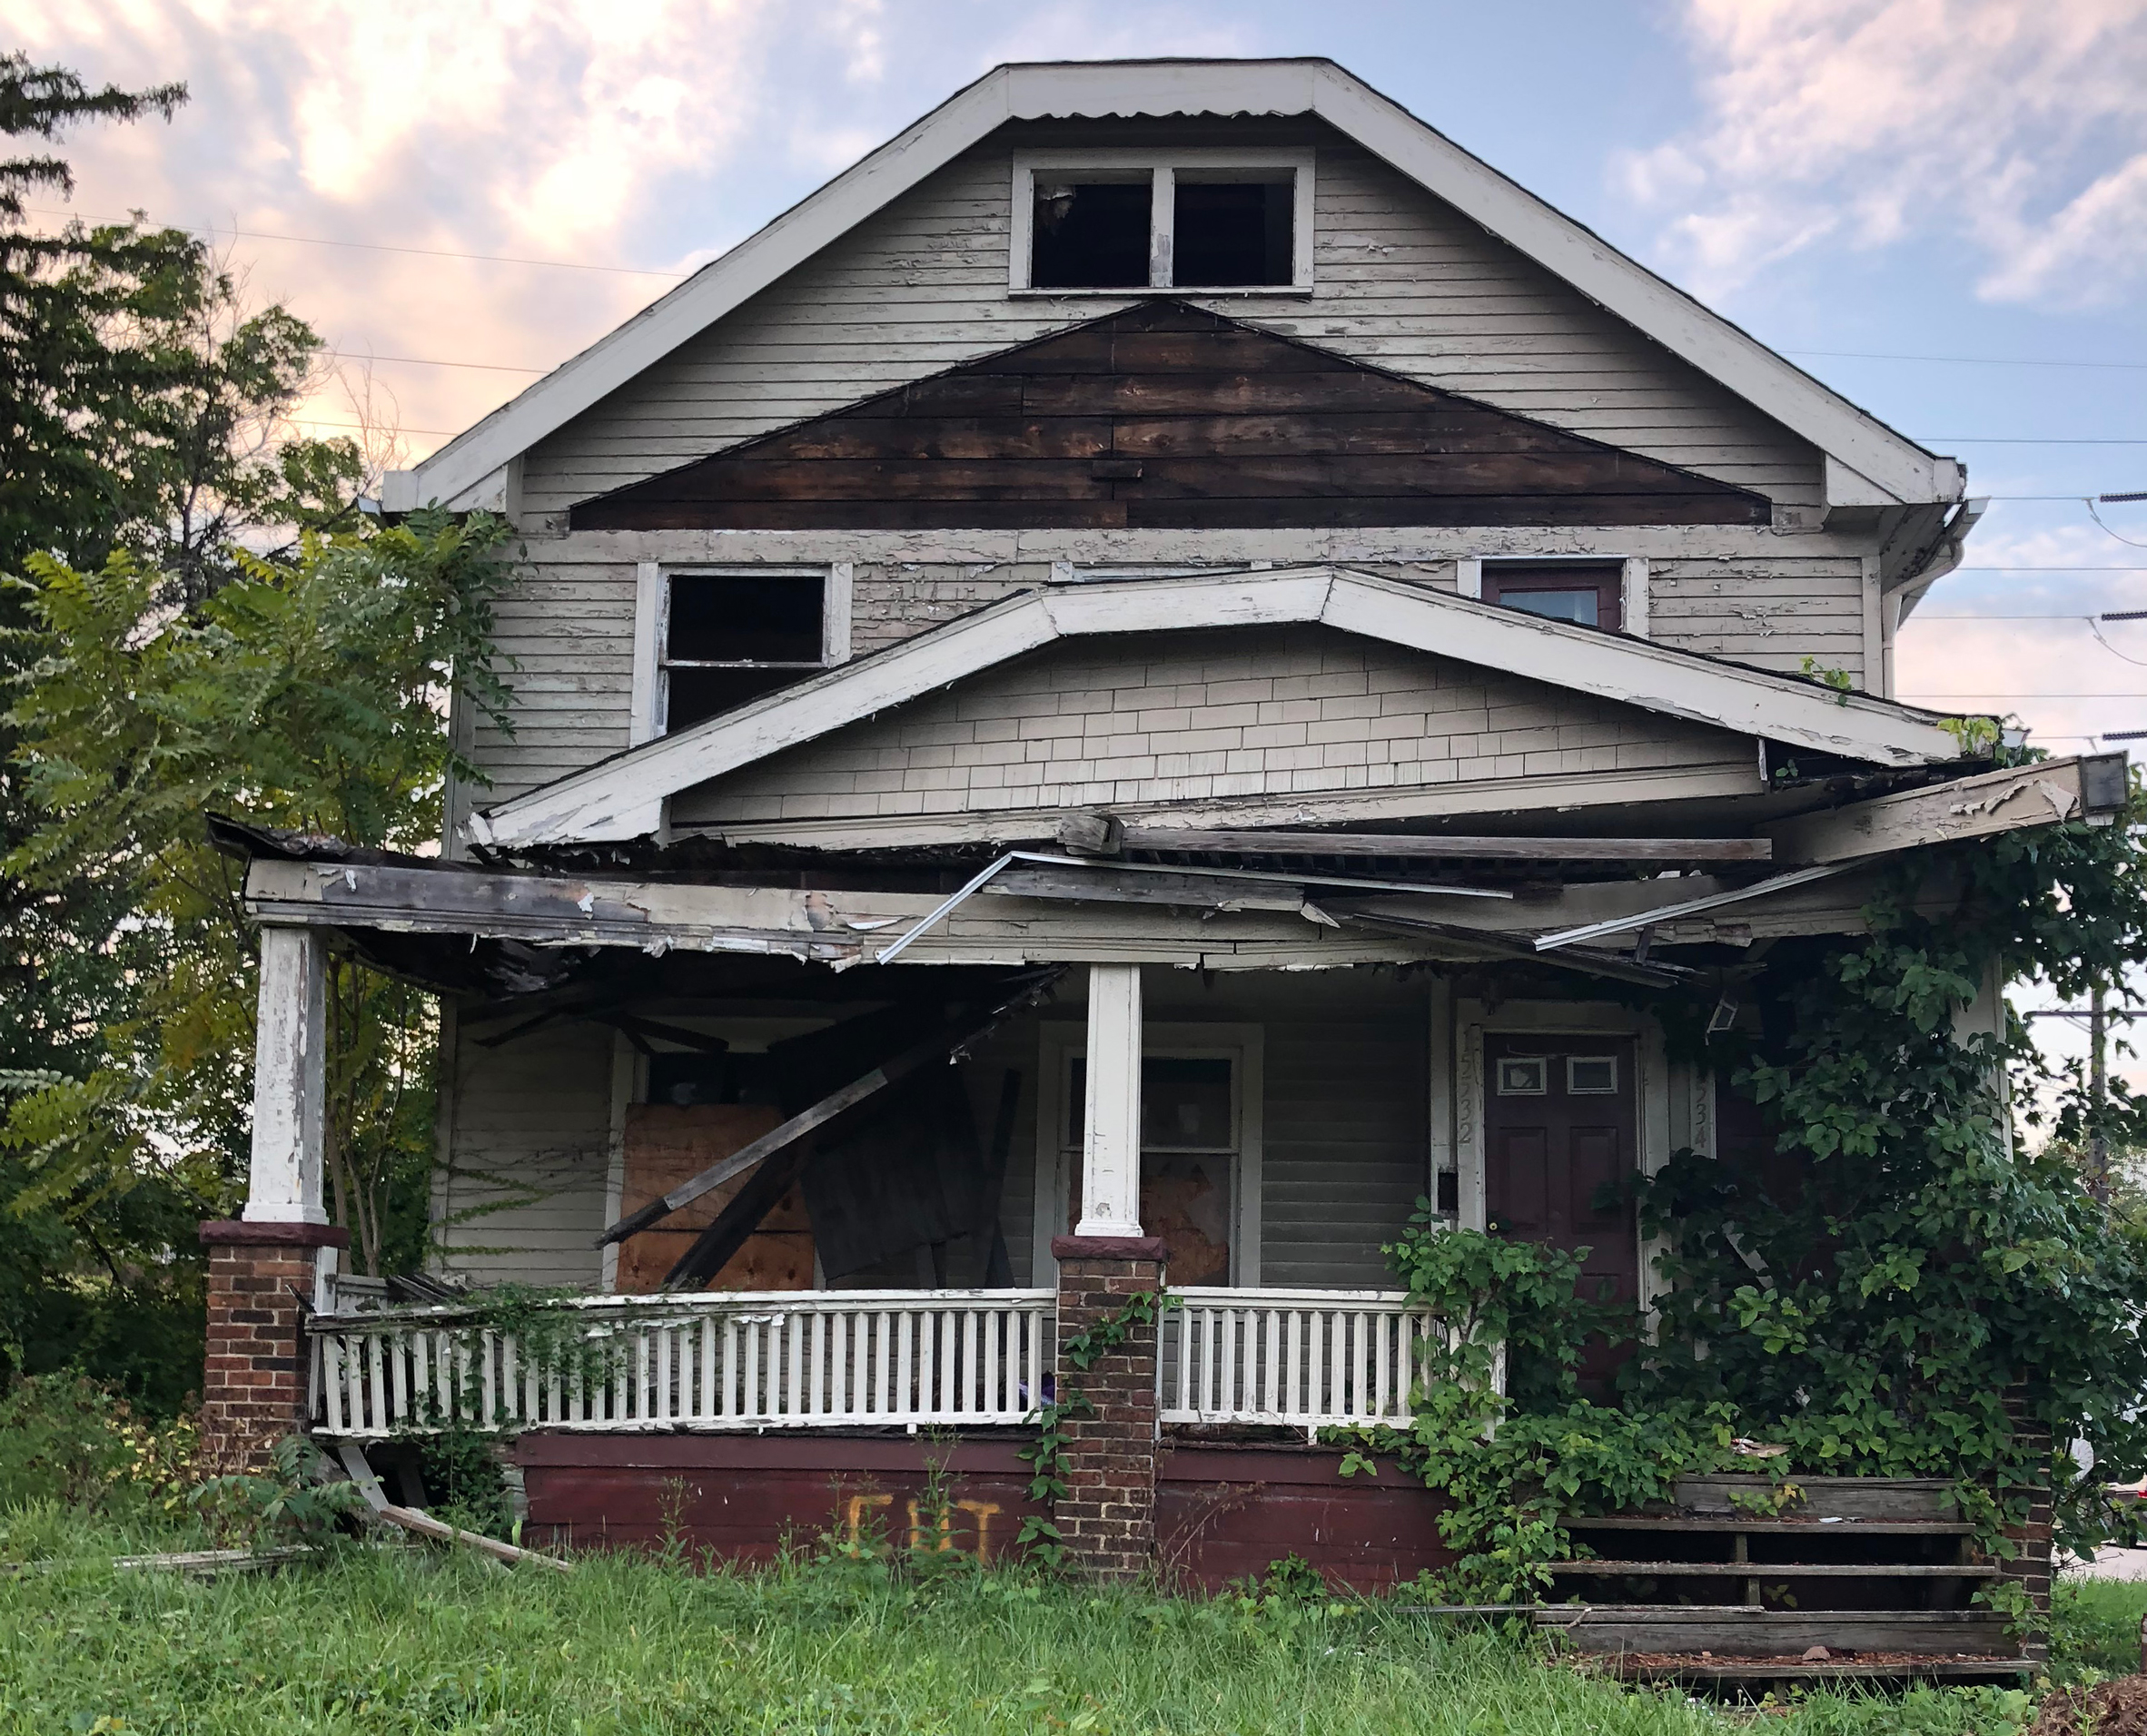 Cleveland firm Redhouse Architecture is planning to recycle derelict homes by combining waste materials from demolitions with mushroom mycelium, creating new building materials.